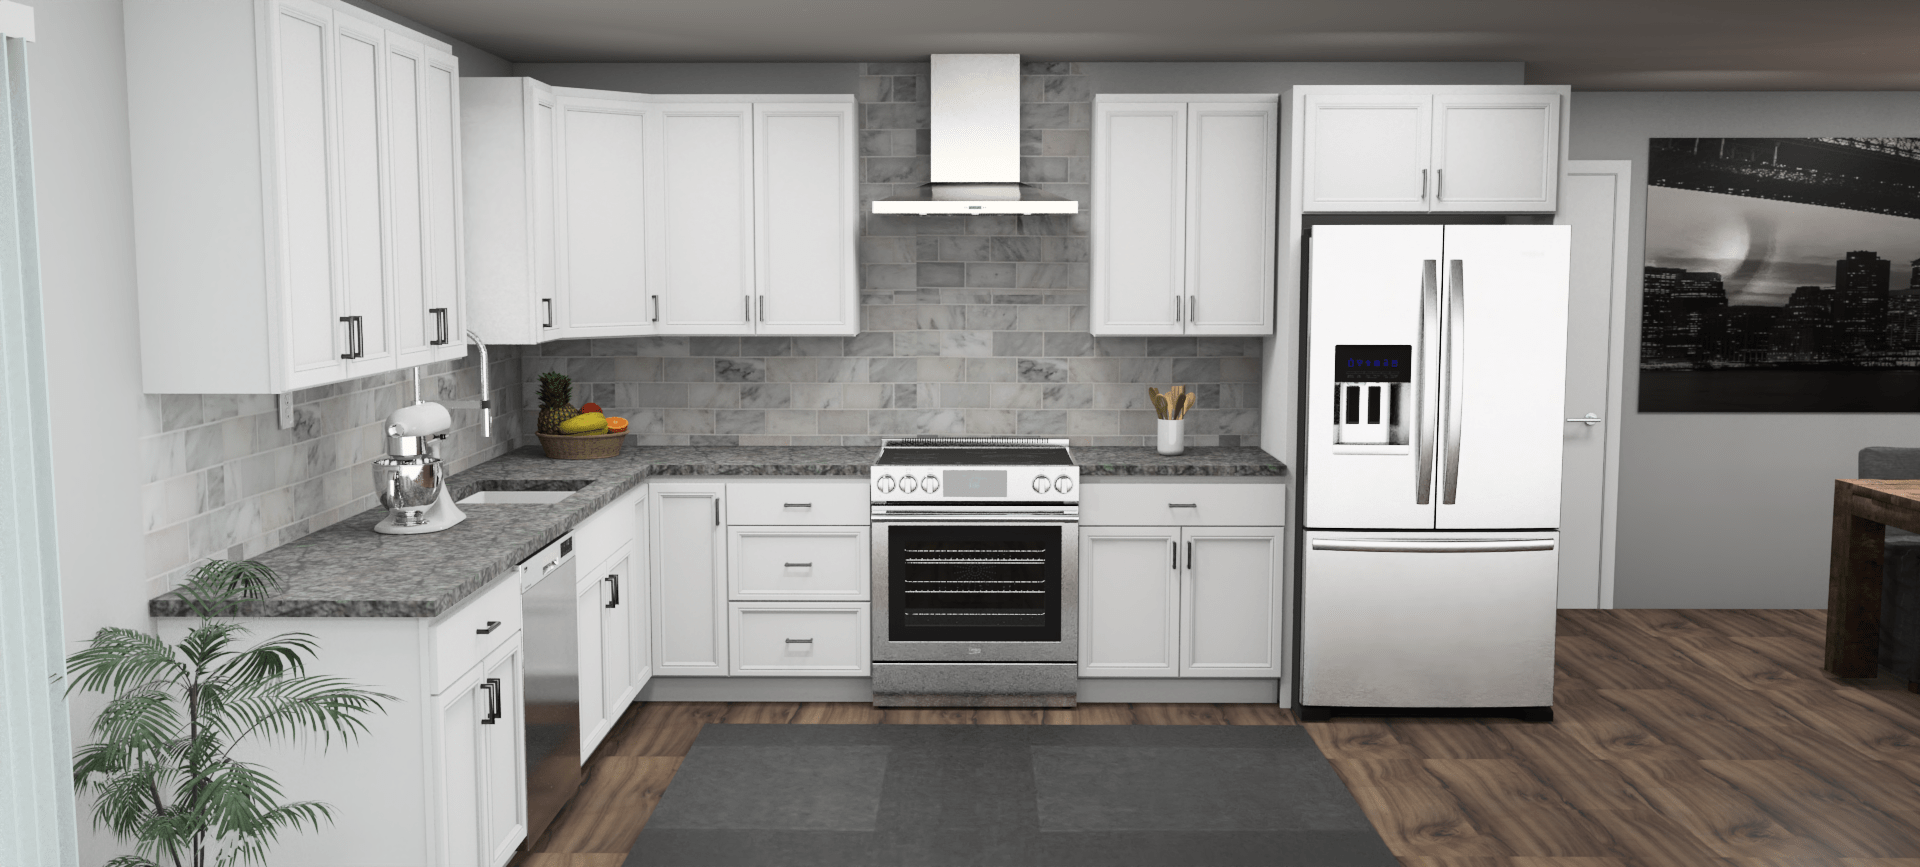 Pioneer The Modern White Shaker 10 x 13 L Shaped Kitchen Front Layout Photo